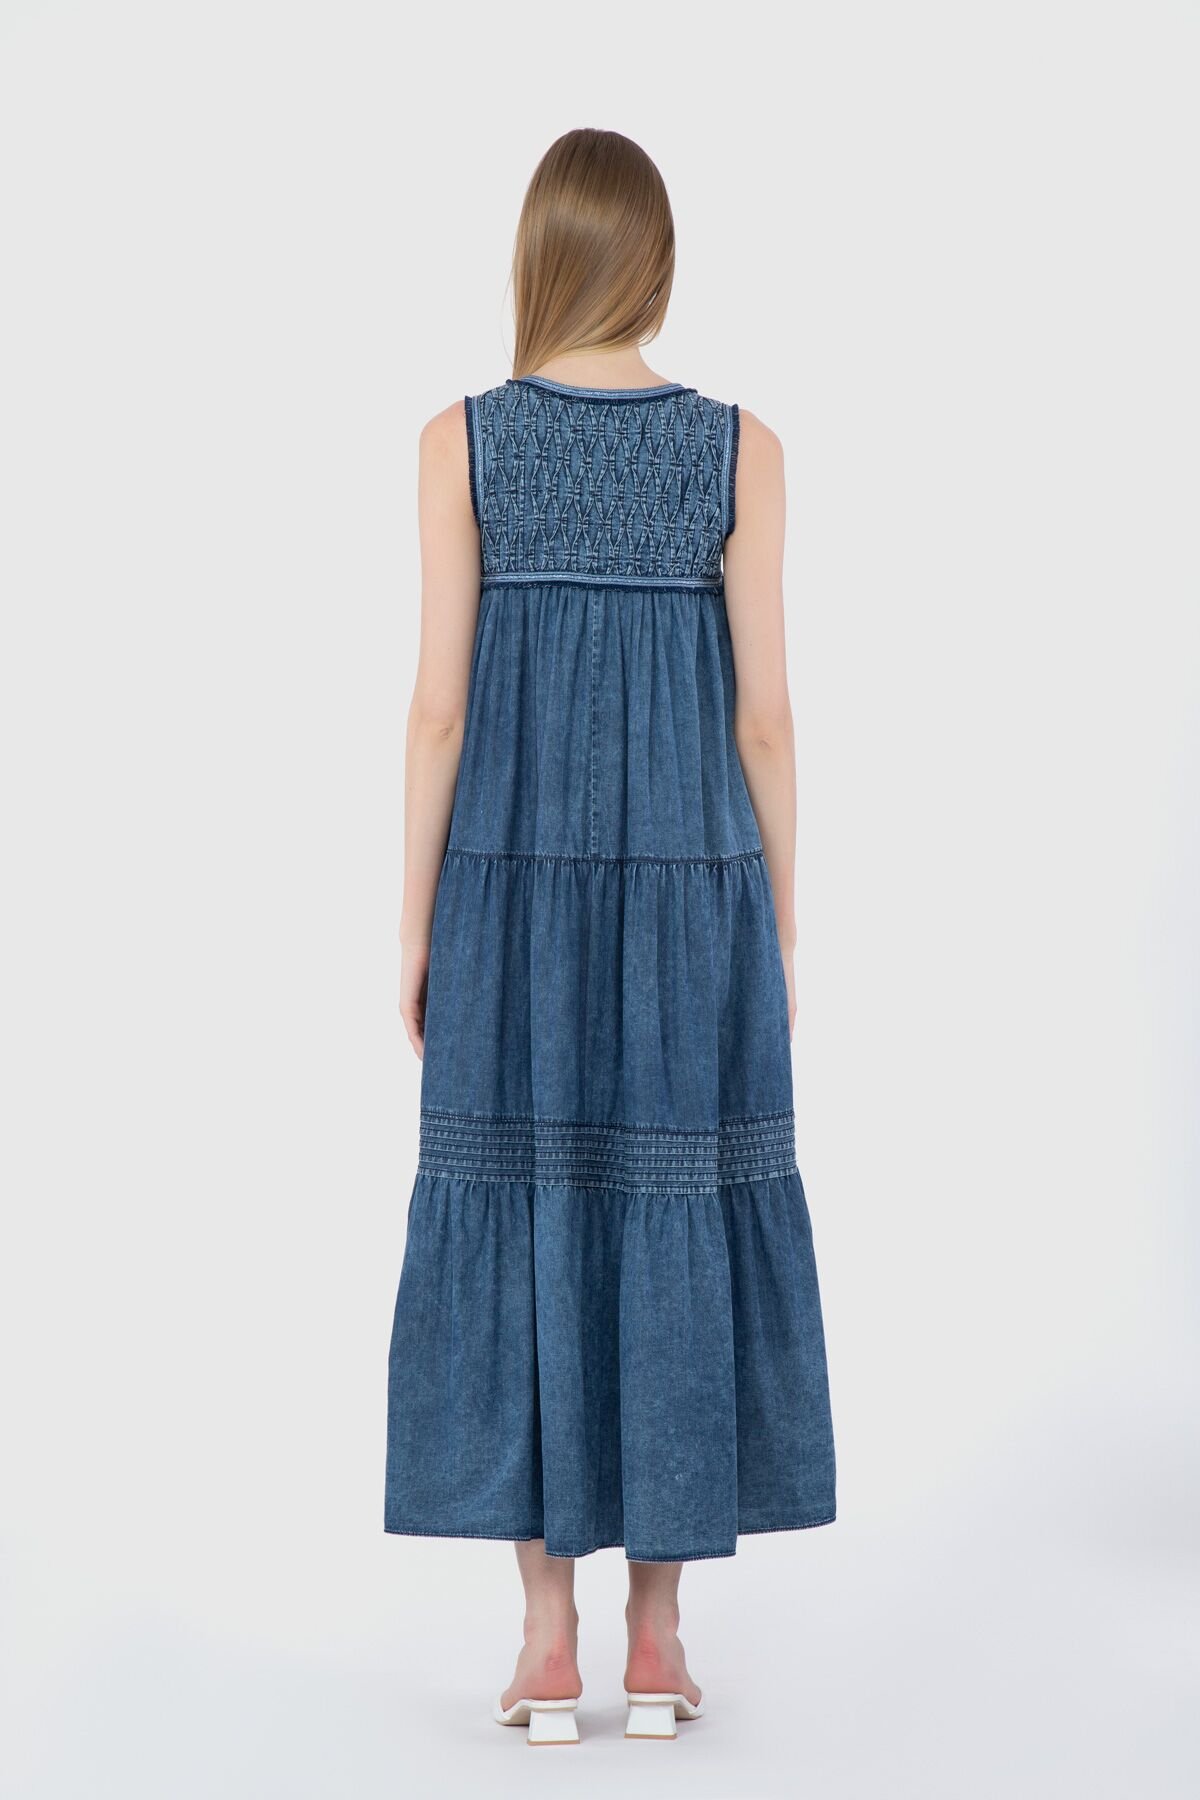 Sewing Detailed Front Buttoned Pleated Long Blue Jean Dress